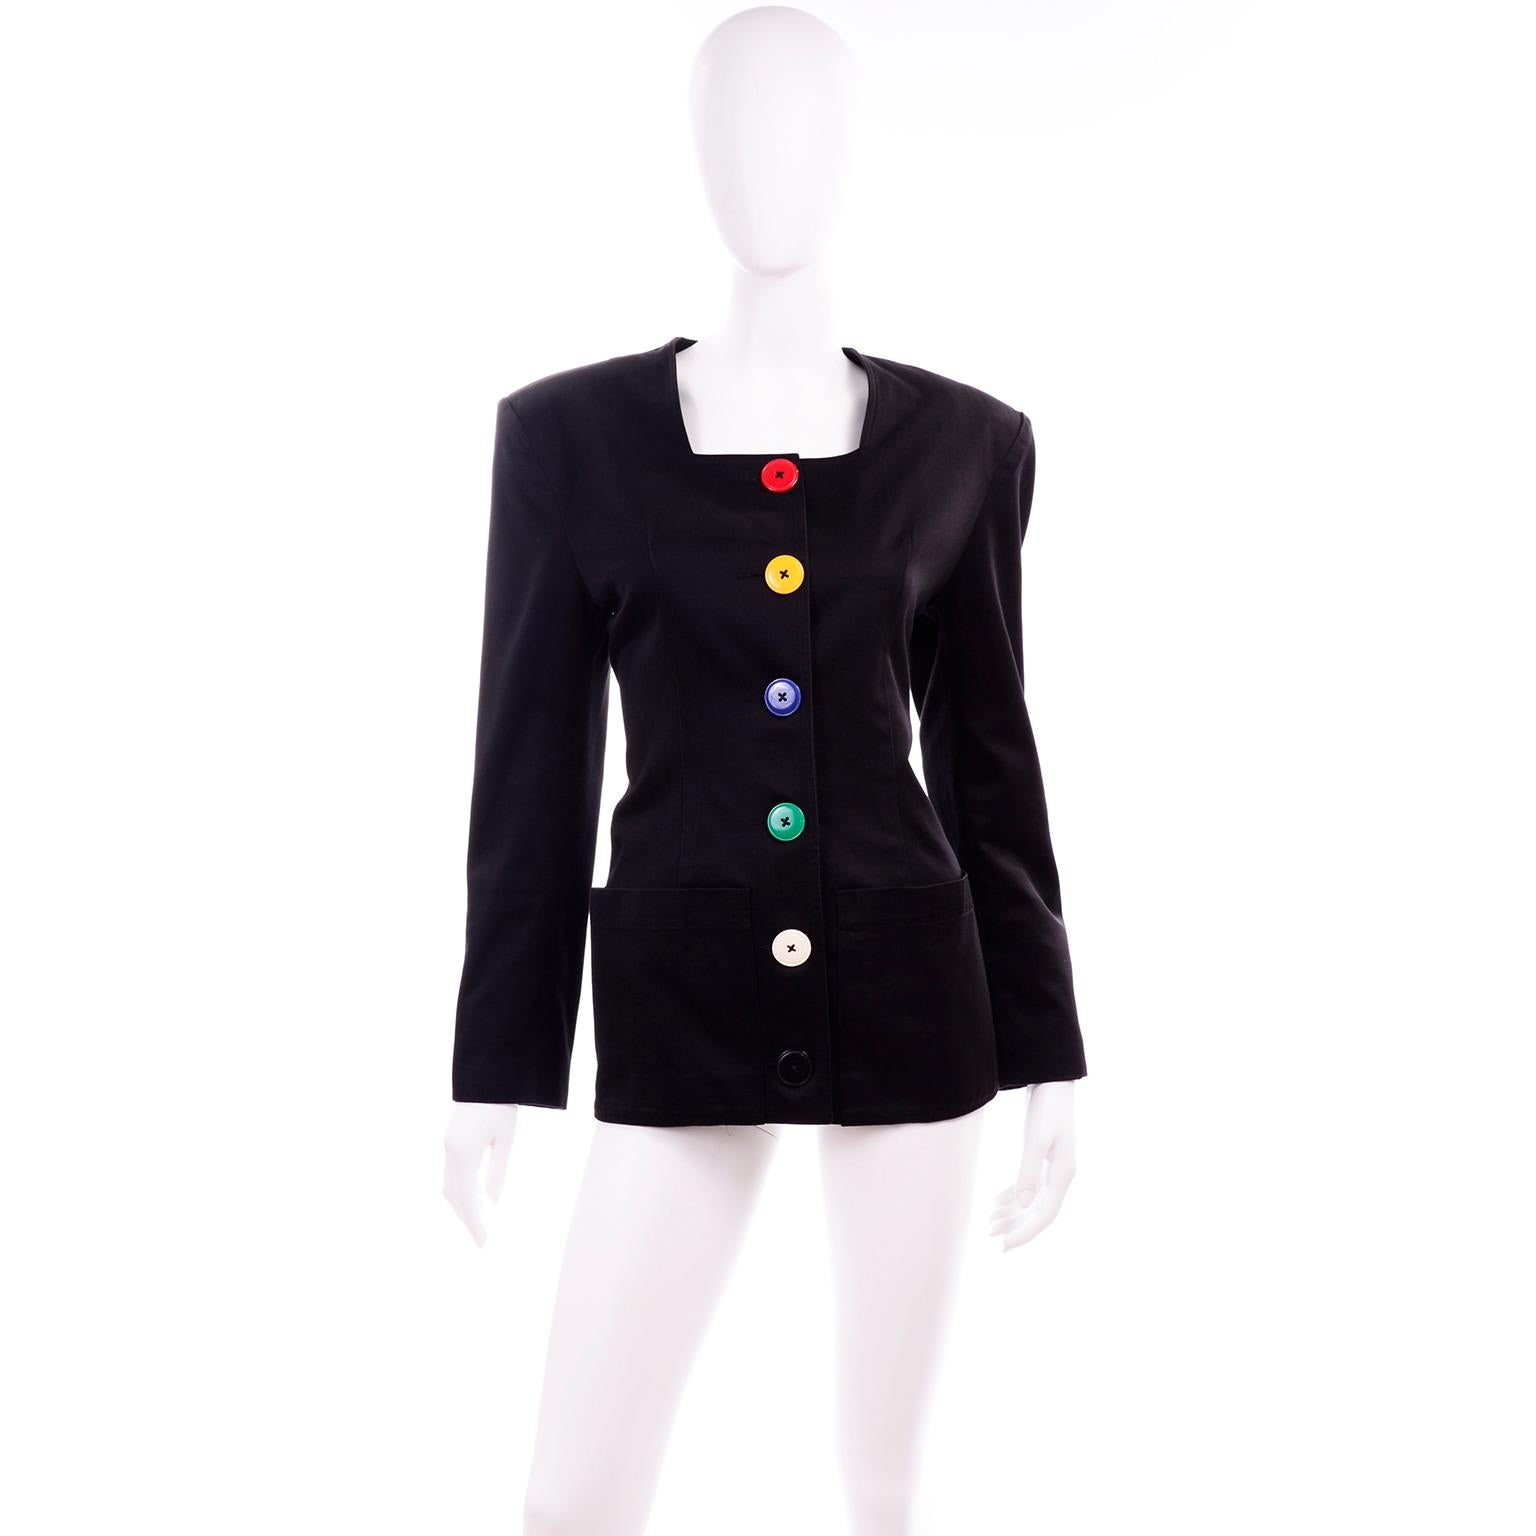 This is a fabulous vintage Patrick Kelly black jacket with multi colored buttons up the front and on the cuffs. This 1980's black cotton blazer has shoulder pads and is lined in a rayon blend. The buttons are in shades of yellow, green, red, white,